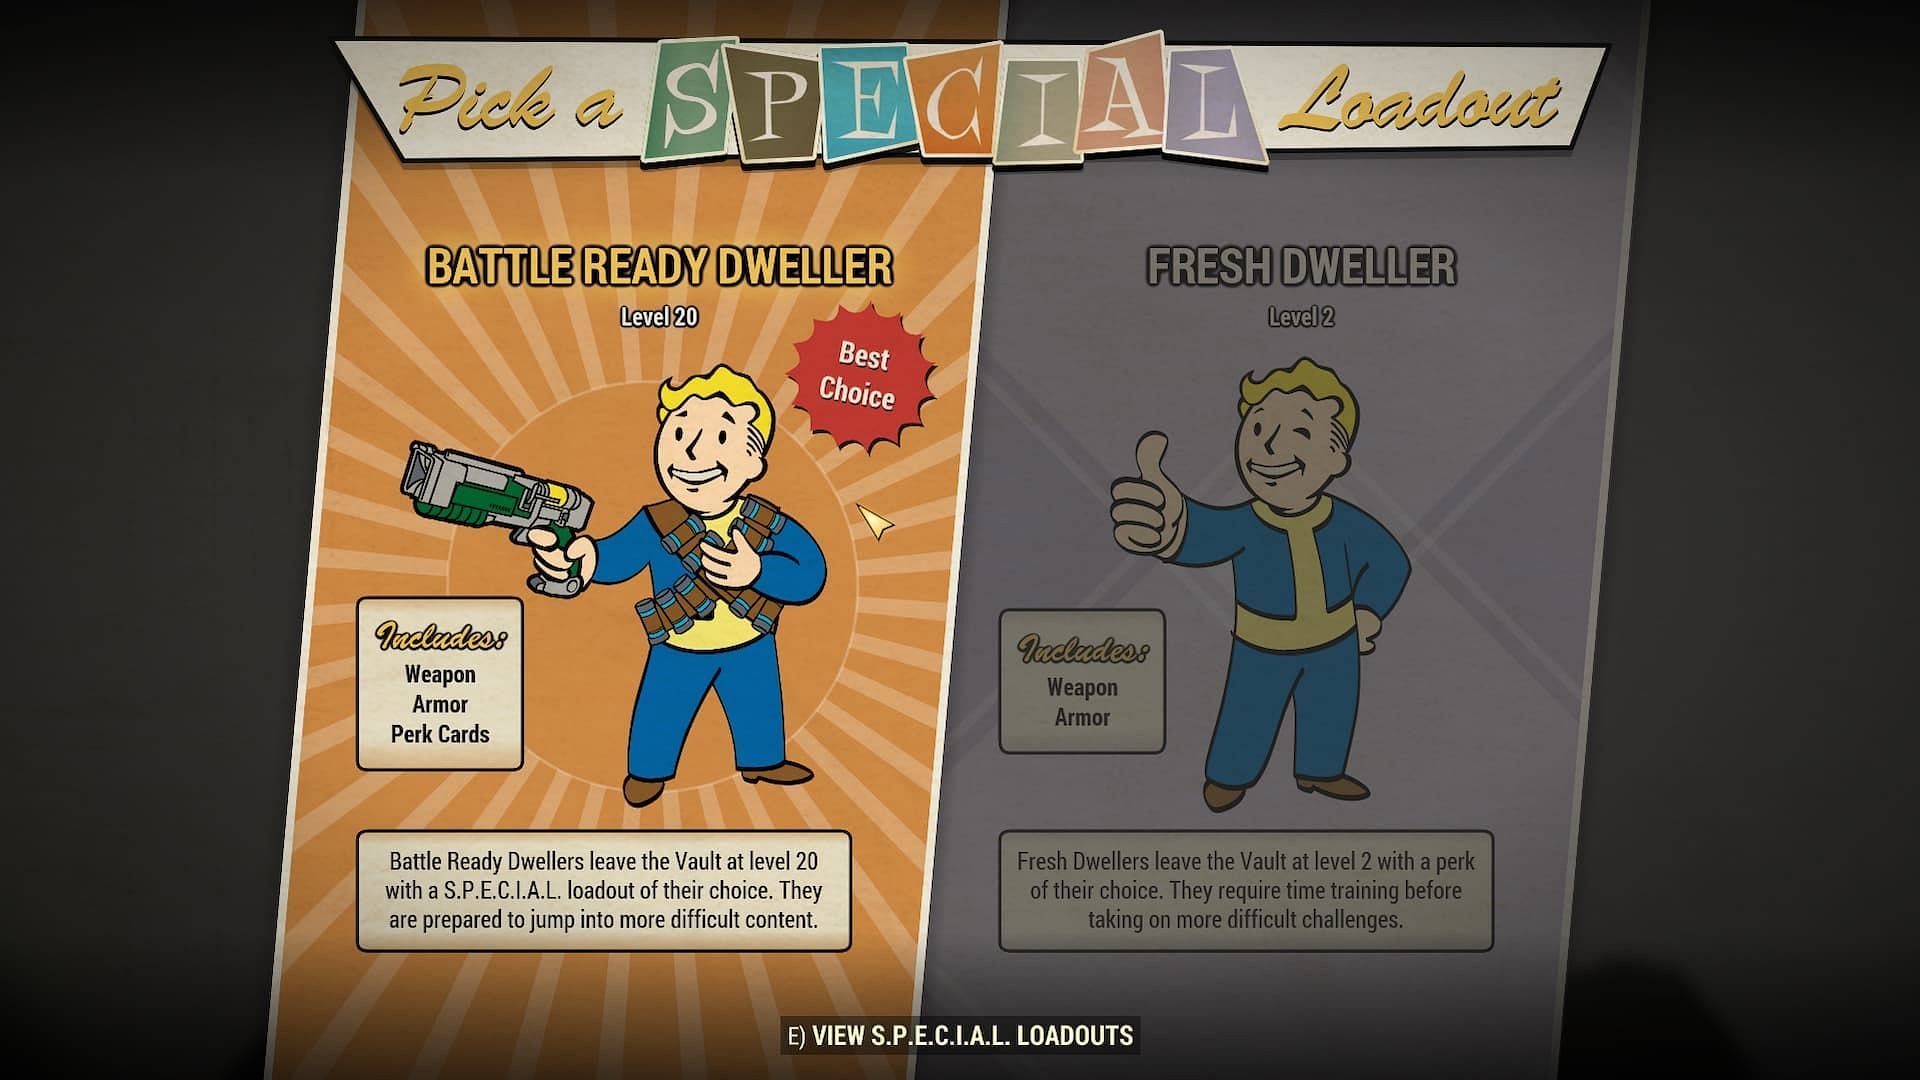 You can choose between starting at Level 20 or Level 2 at the beginning of the game. (Image via Bethesda Game Studios)